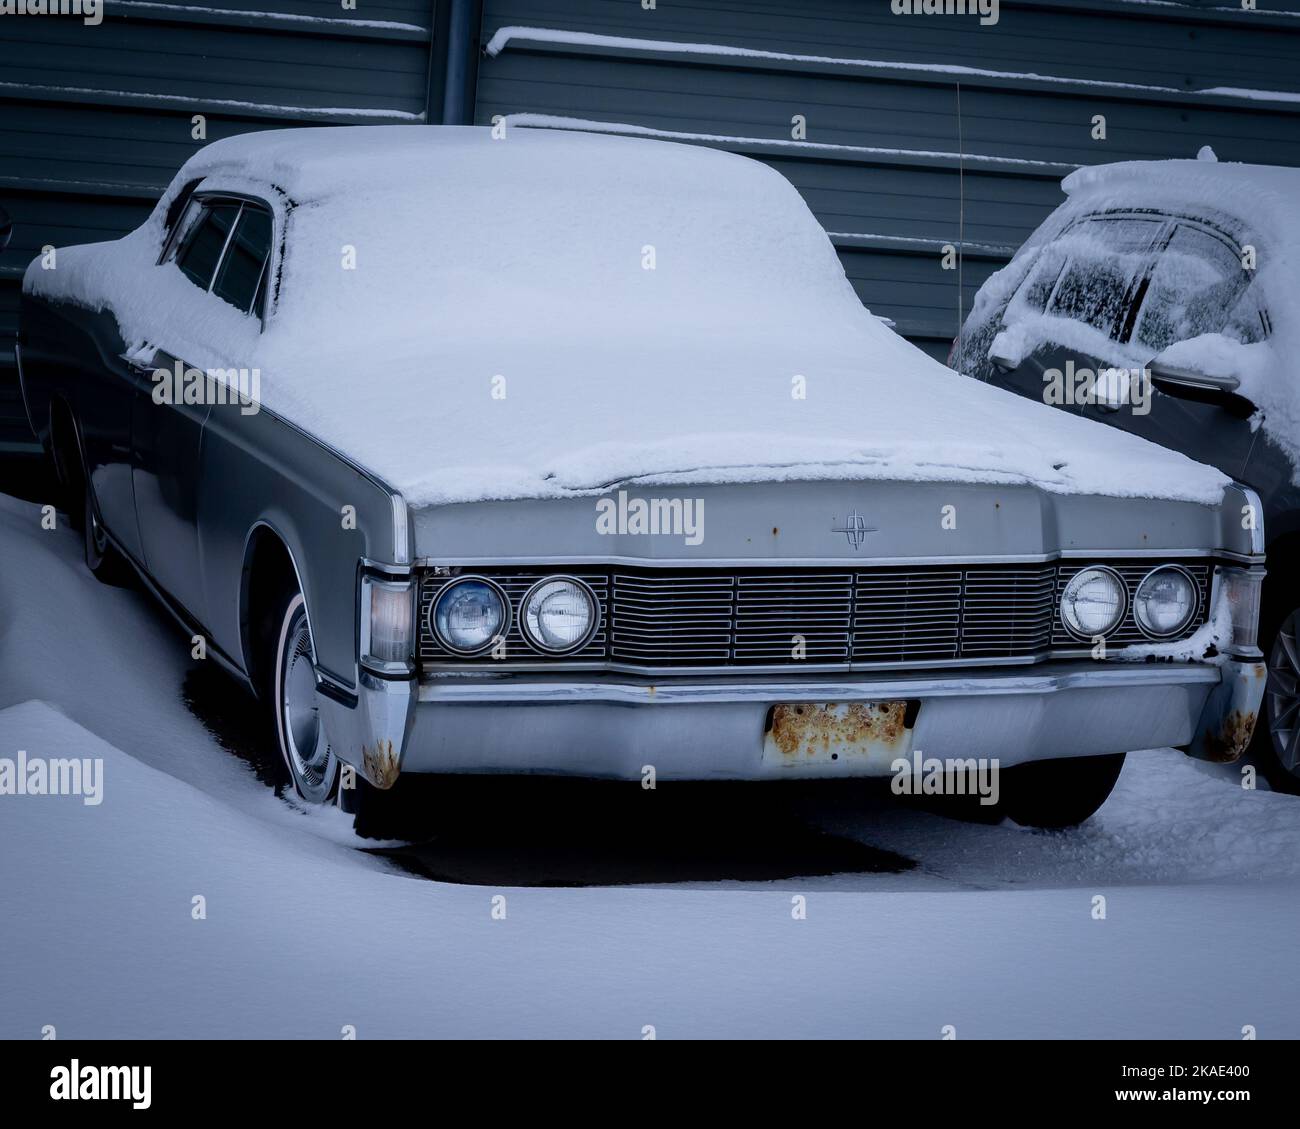 Reykjavik, Iceland - January 24, 2022: Old, abandoned classic Lincoln Continental car, covered with snow. Stock Photo